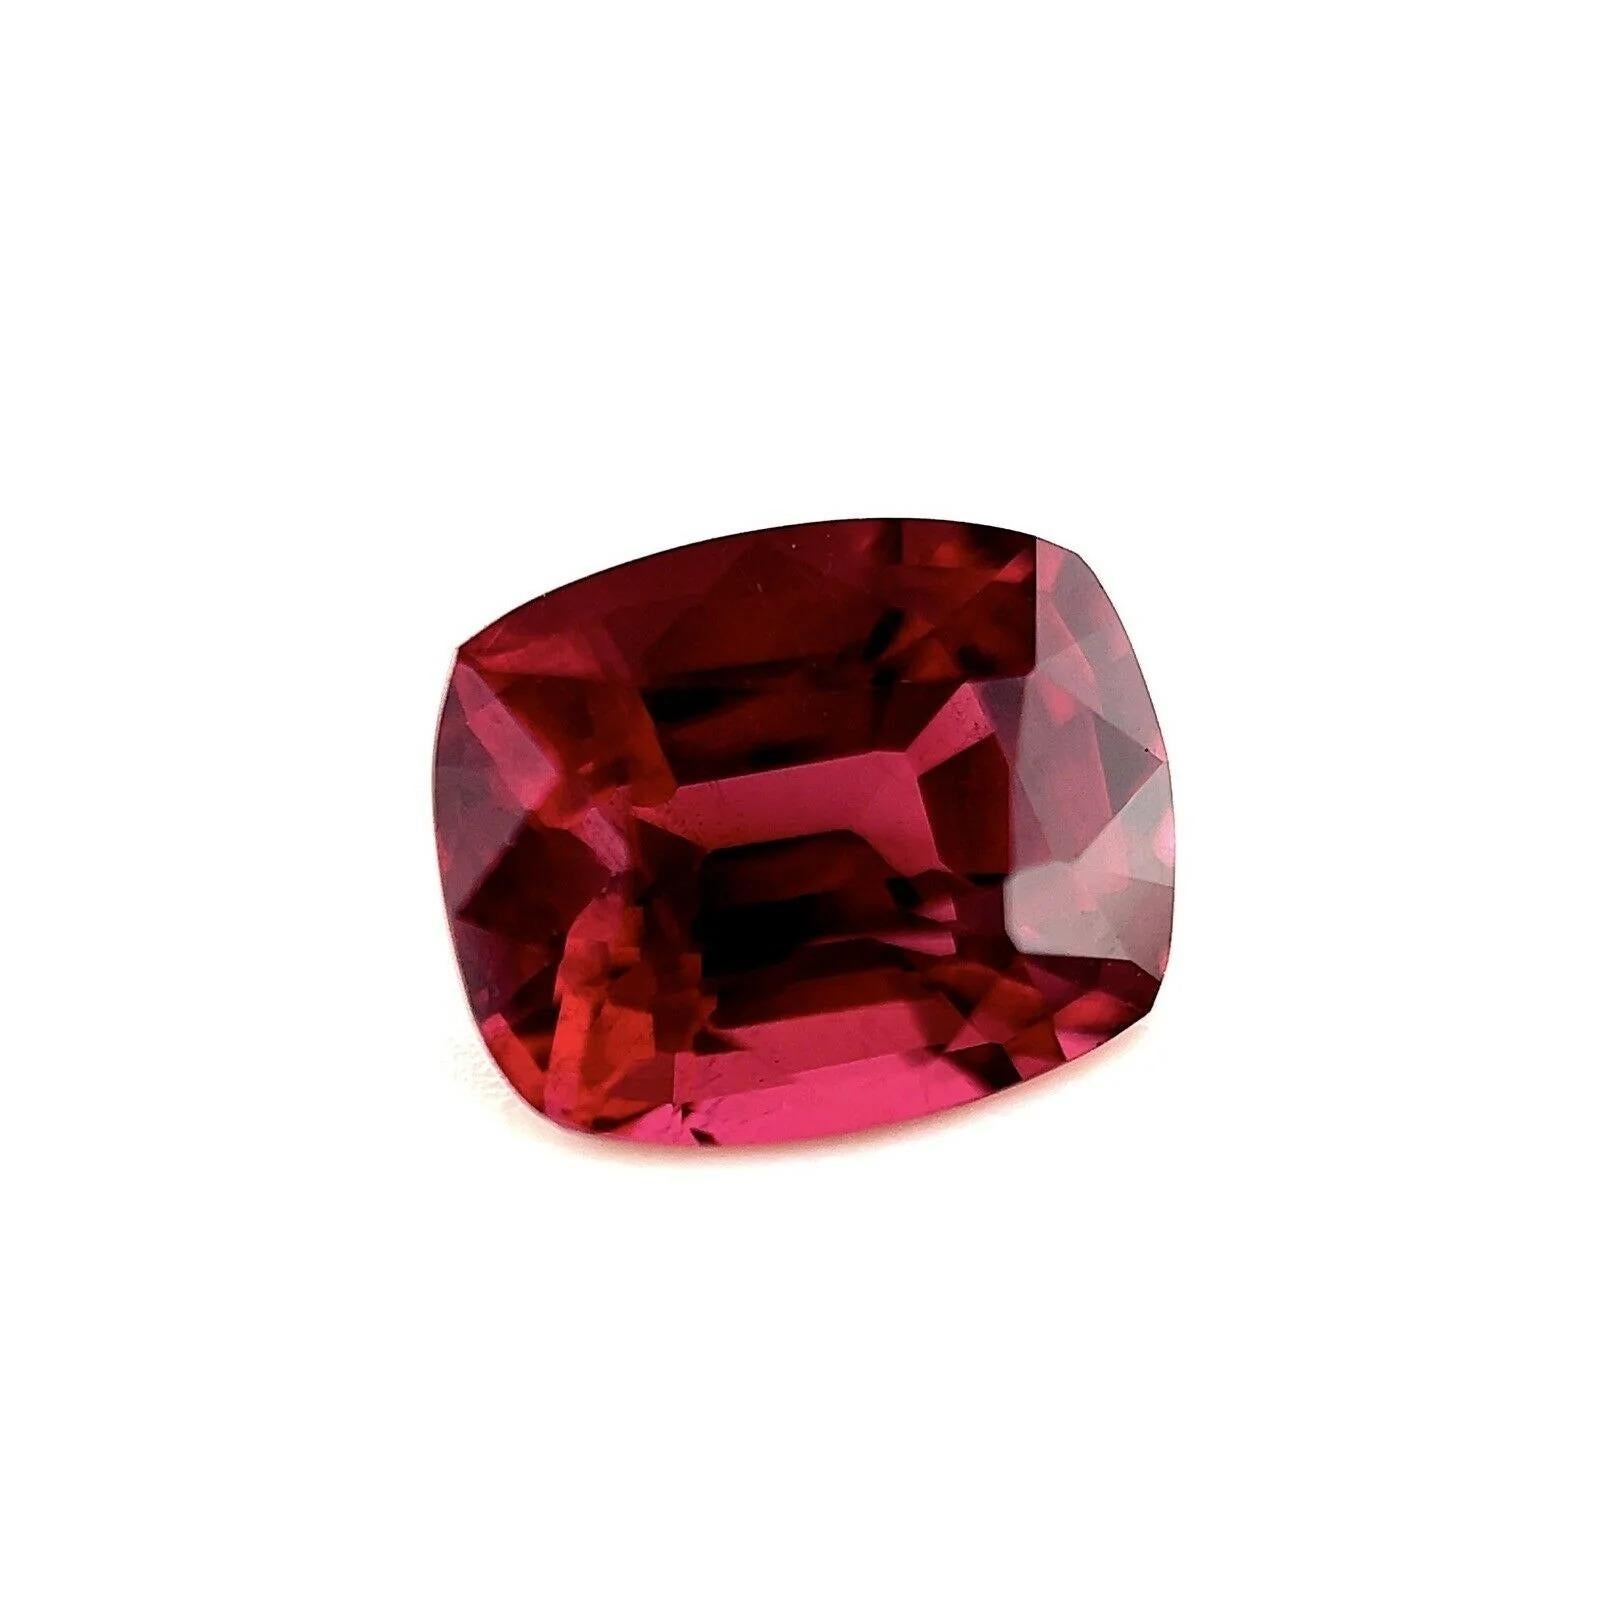 2.16ct Fine Vivid Pink Red Rhodolite Garnet Cushion Cut 7.8x6.4mm Loose Rare Gem

Fine Natural Vivid Red Rhodolite Garnet Gem.
2.16 Carat with a beautiful vivid red pink colour and excellent clarity, a very clean stone with only some very small